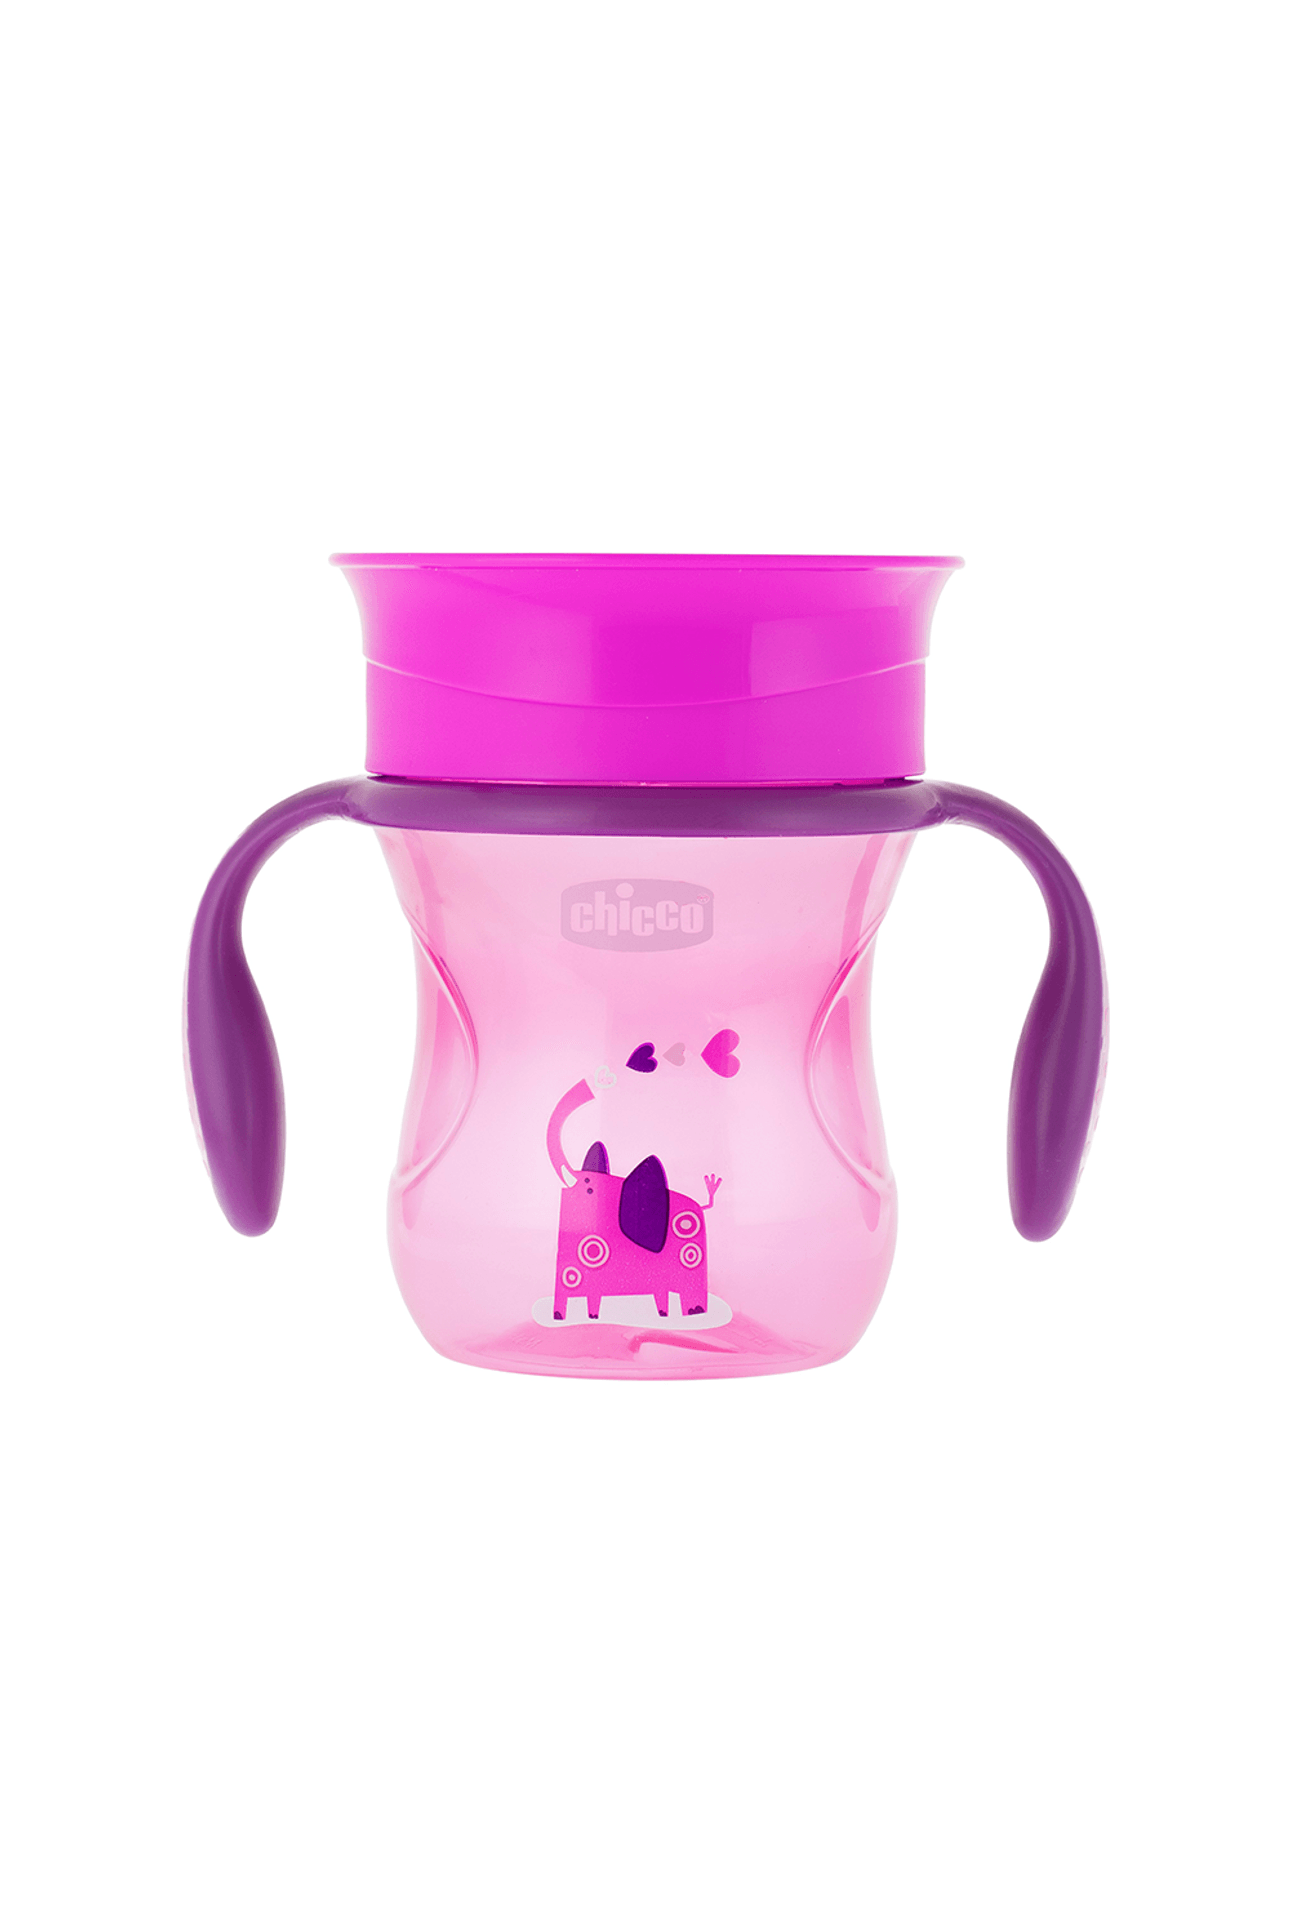 2118875_Chicco-Vaso-Perfect-Cup-12-meses---Rosa-x-200-ml_img1